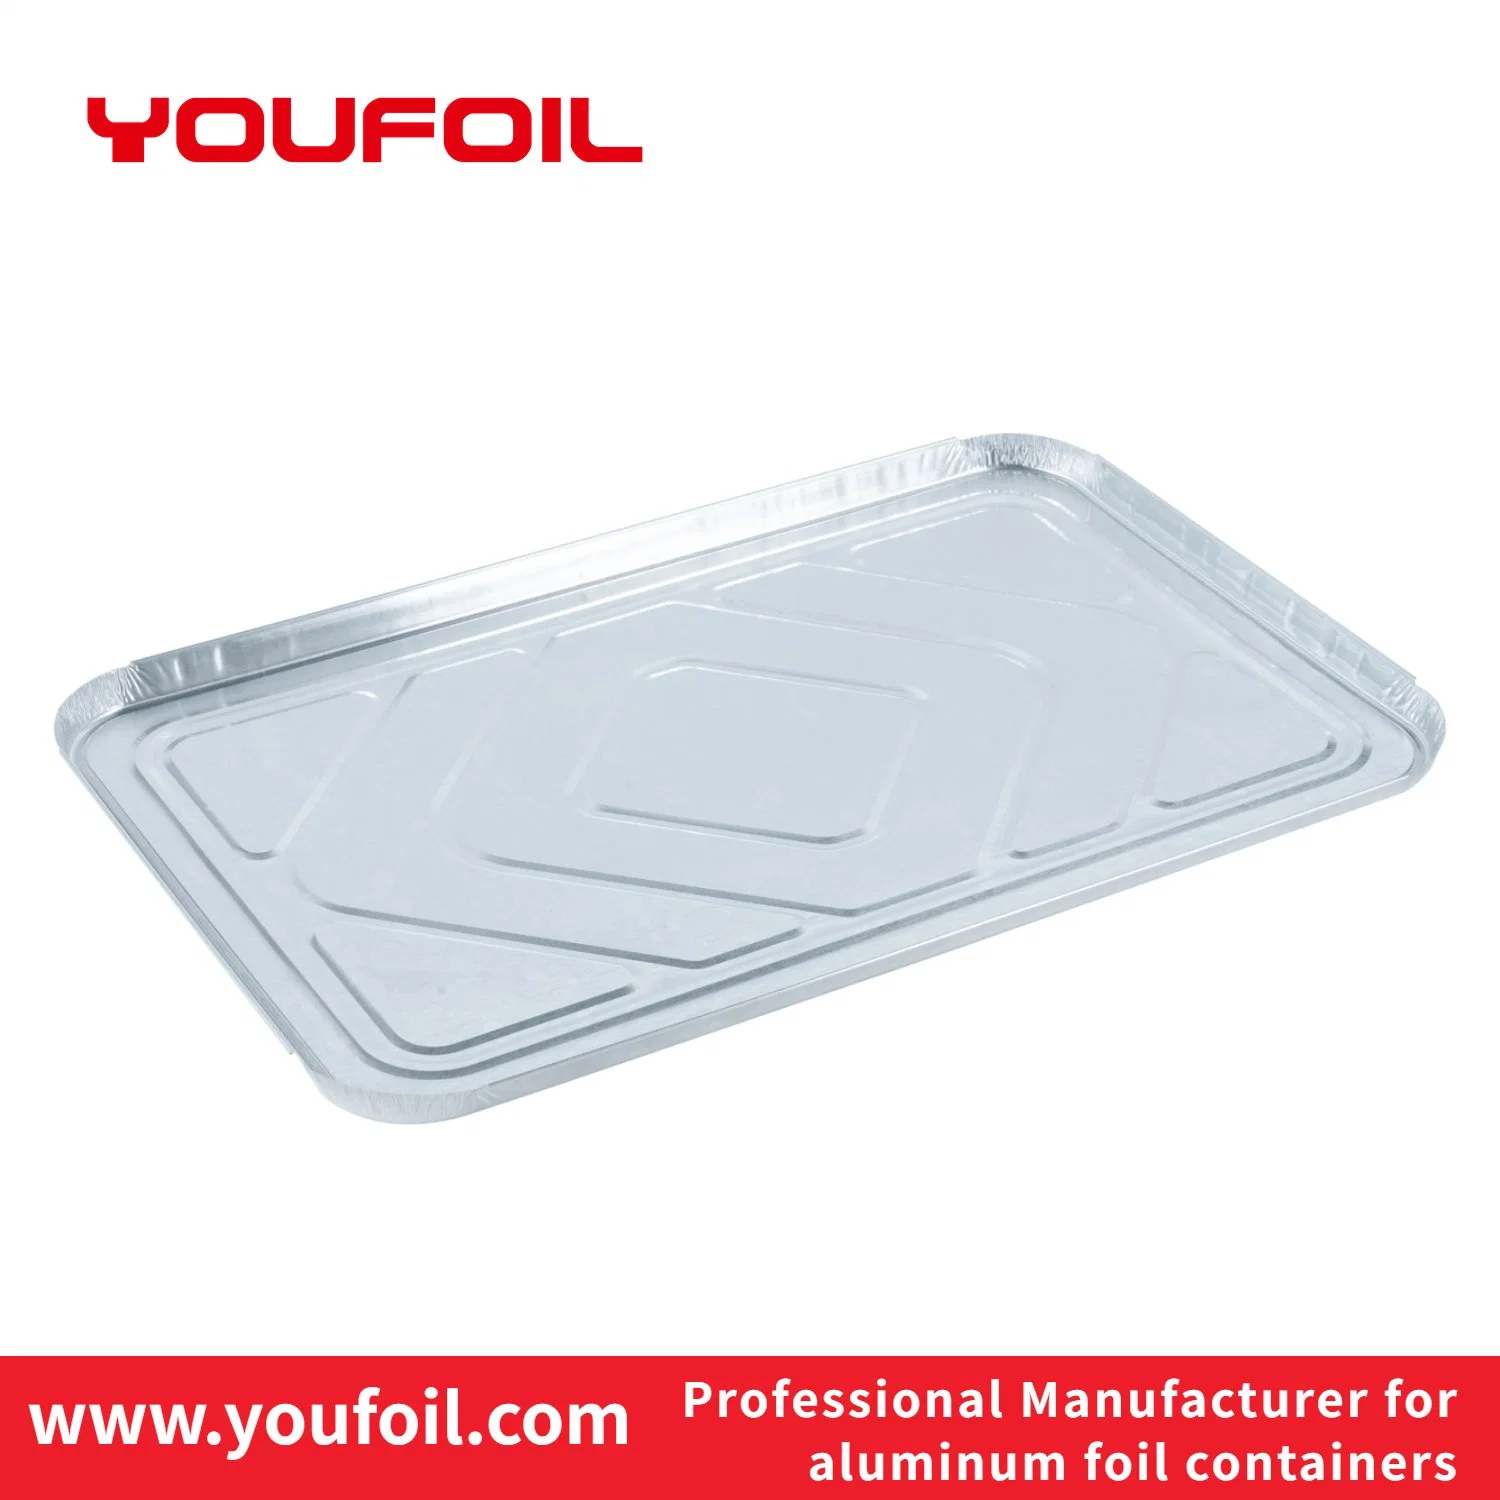 Half Size Aluminum Foil Container Lid Cover for Disposable Food Pan